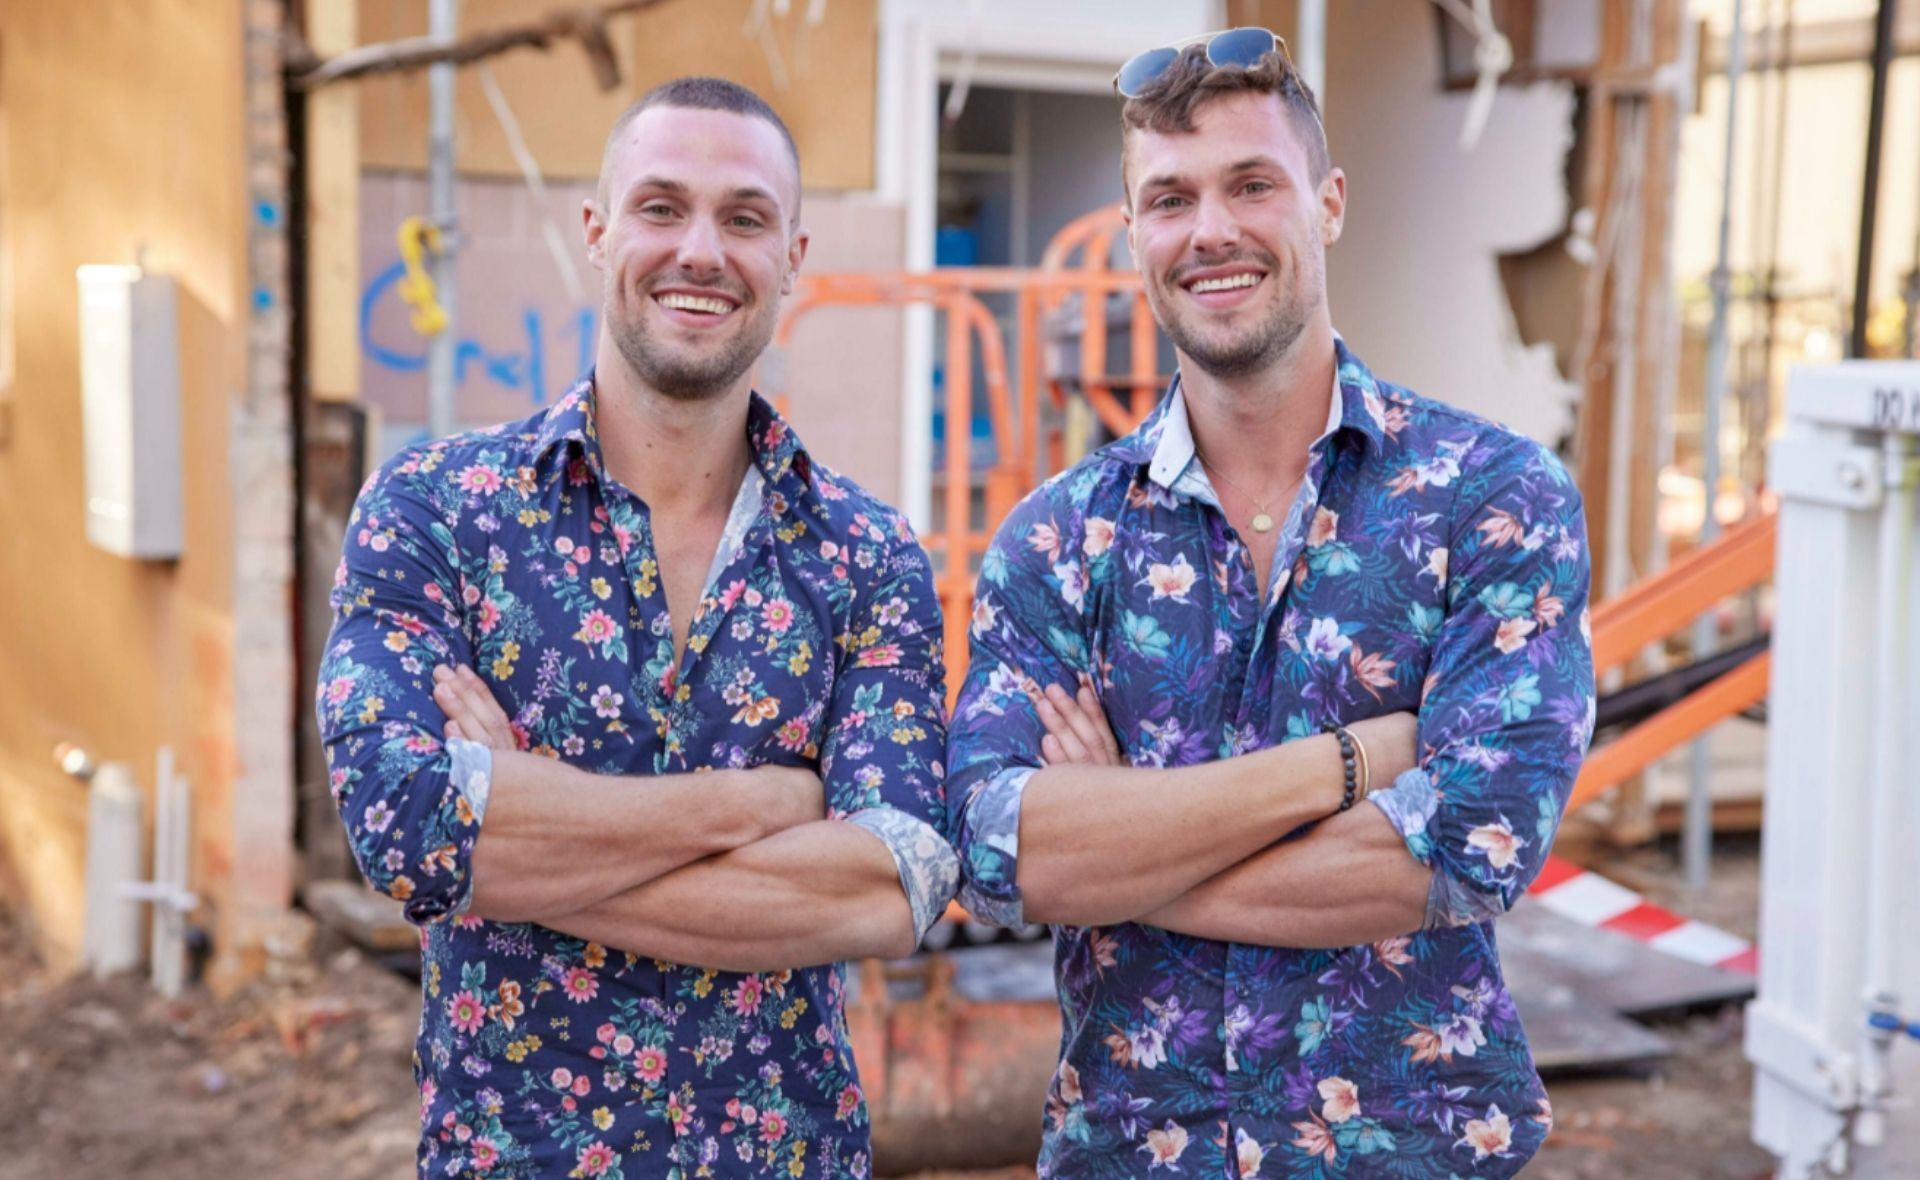 EXCLUSIVE: Love Island twins Luke and Josh reveal the family tragedy that influenced their journey on The Block